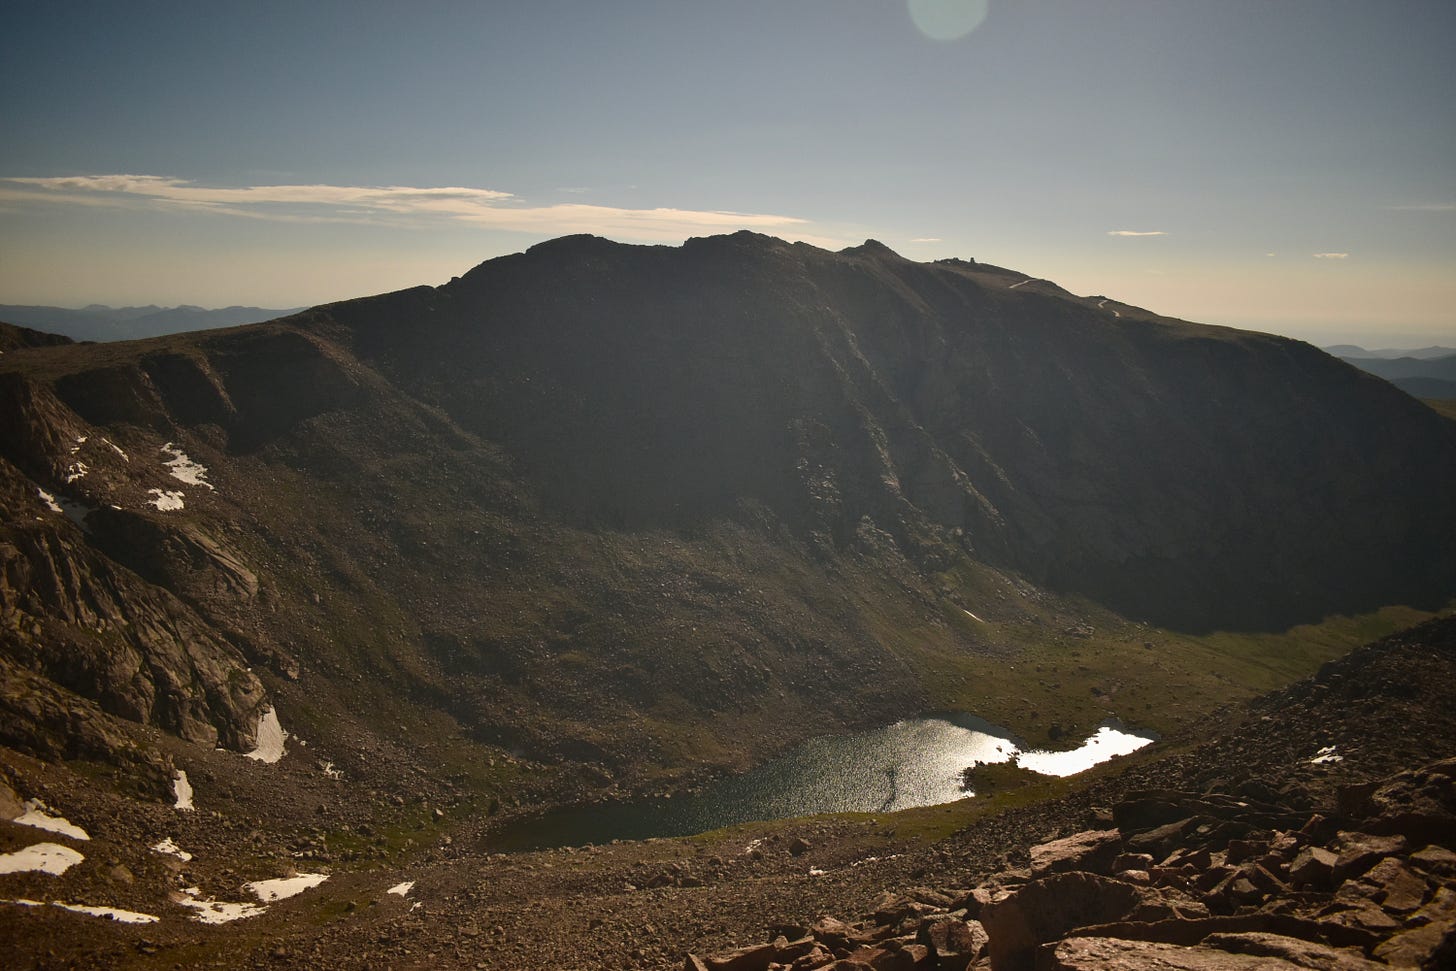 a look at the summit of Mount Evans